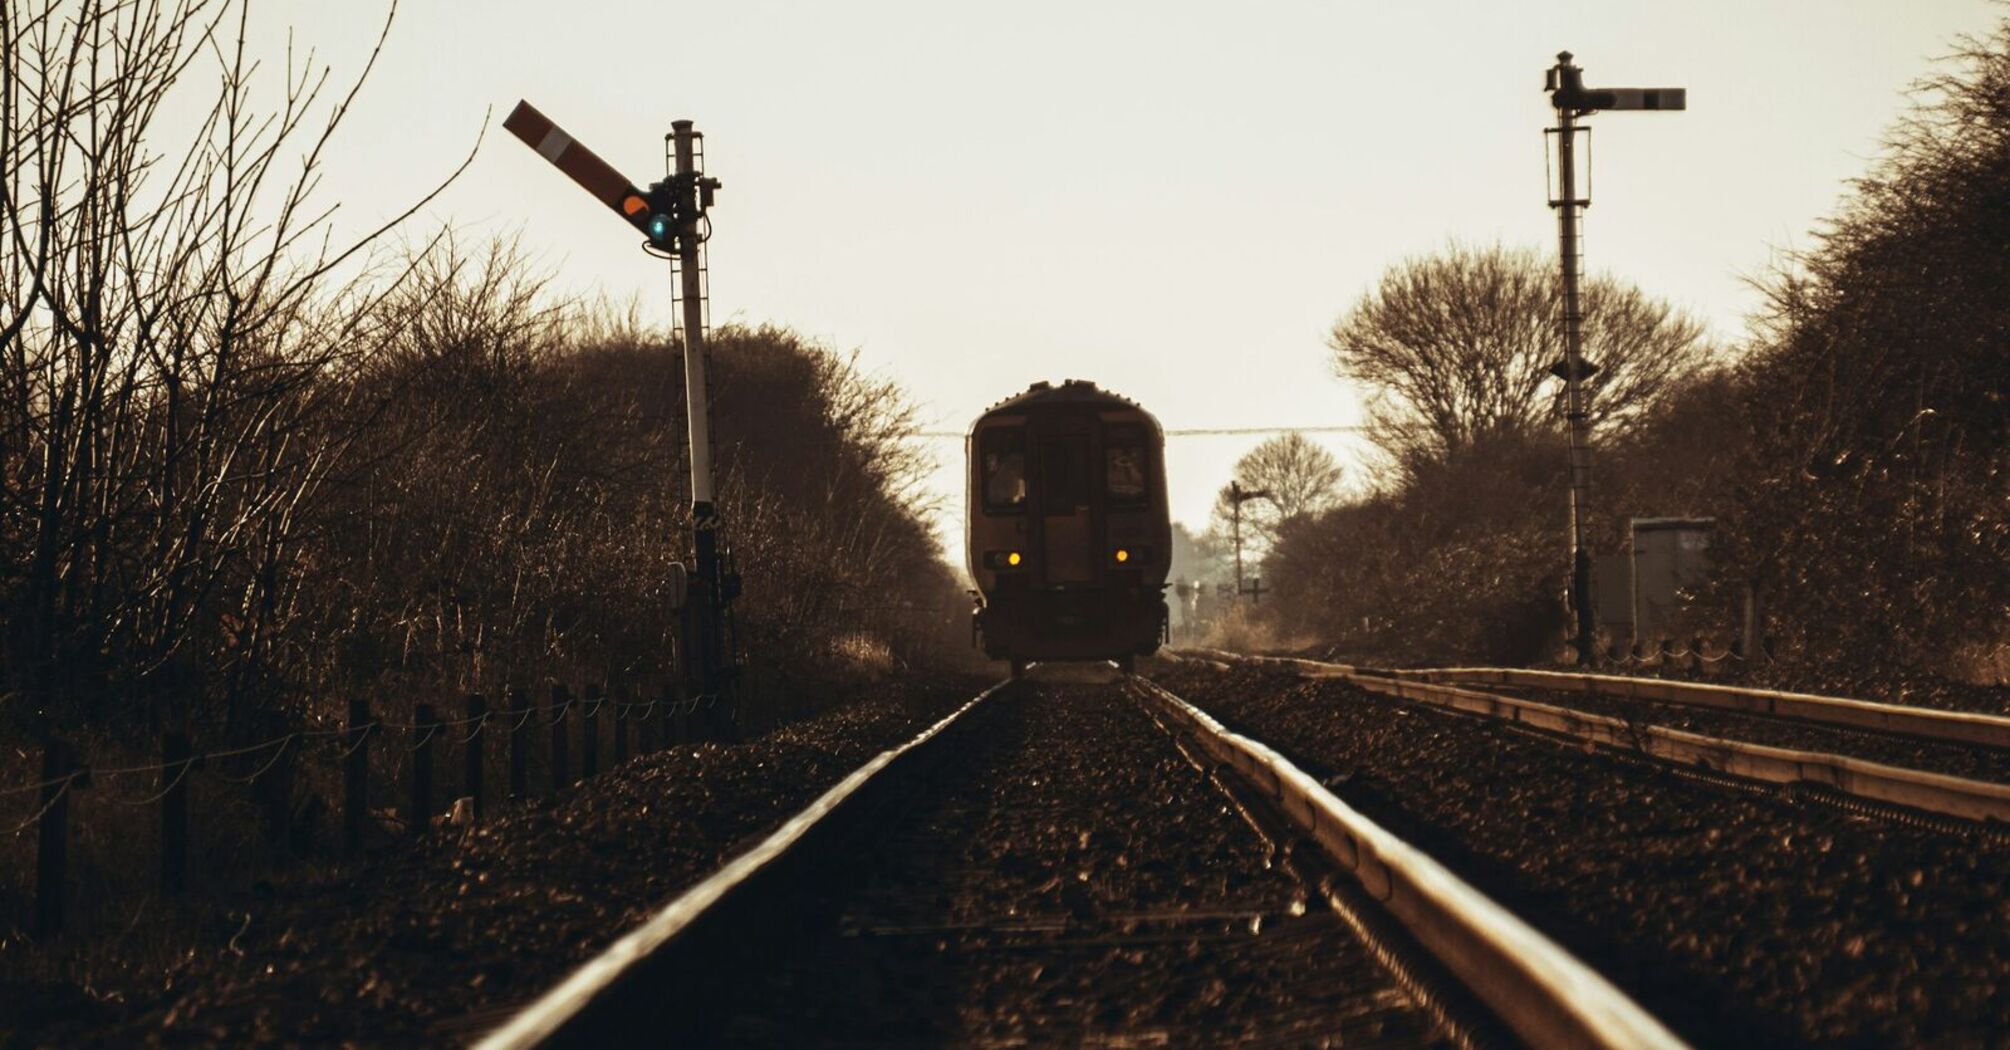 A train approaching on a railway track with signaling equipment visible, set against a background of bare trees under a clear sky in Skegness